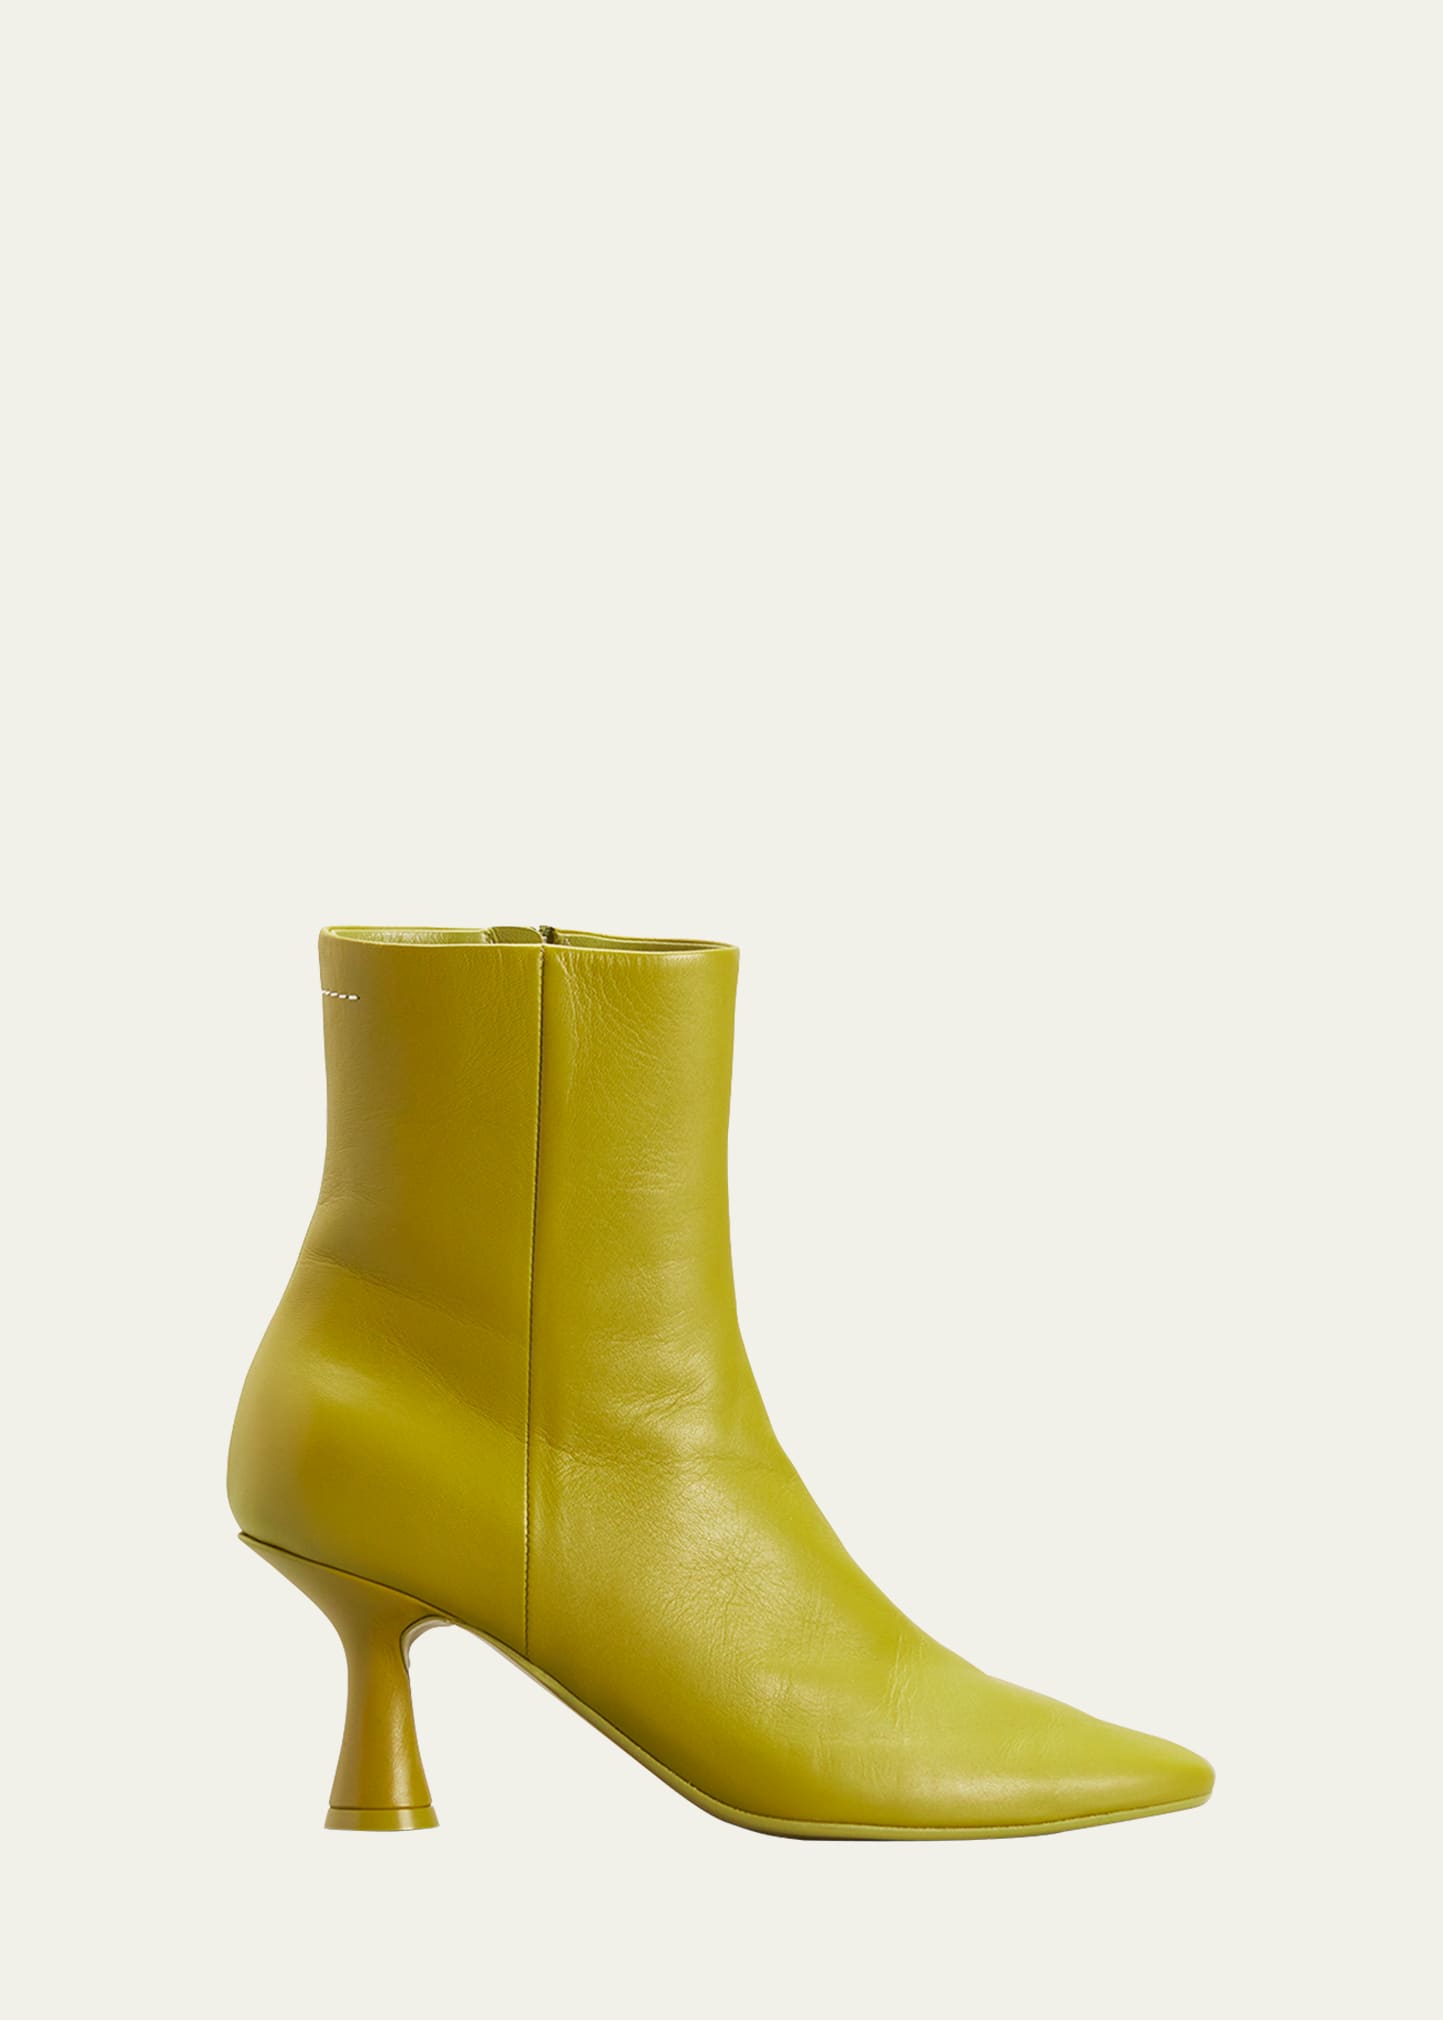 MM6 Maison Margiela Leather Point-Toe Ankle Booties